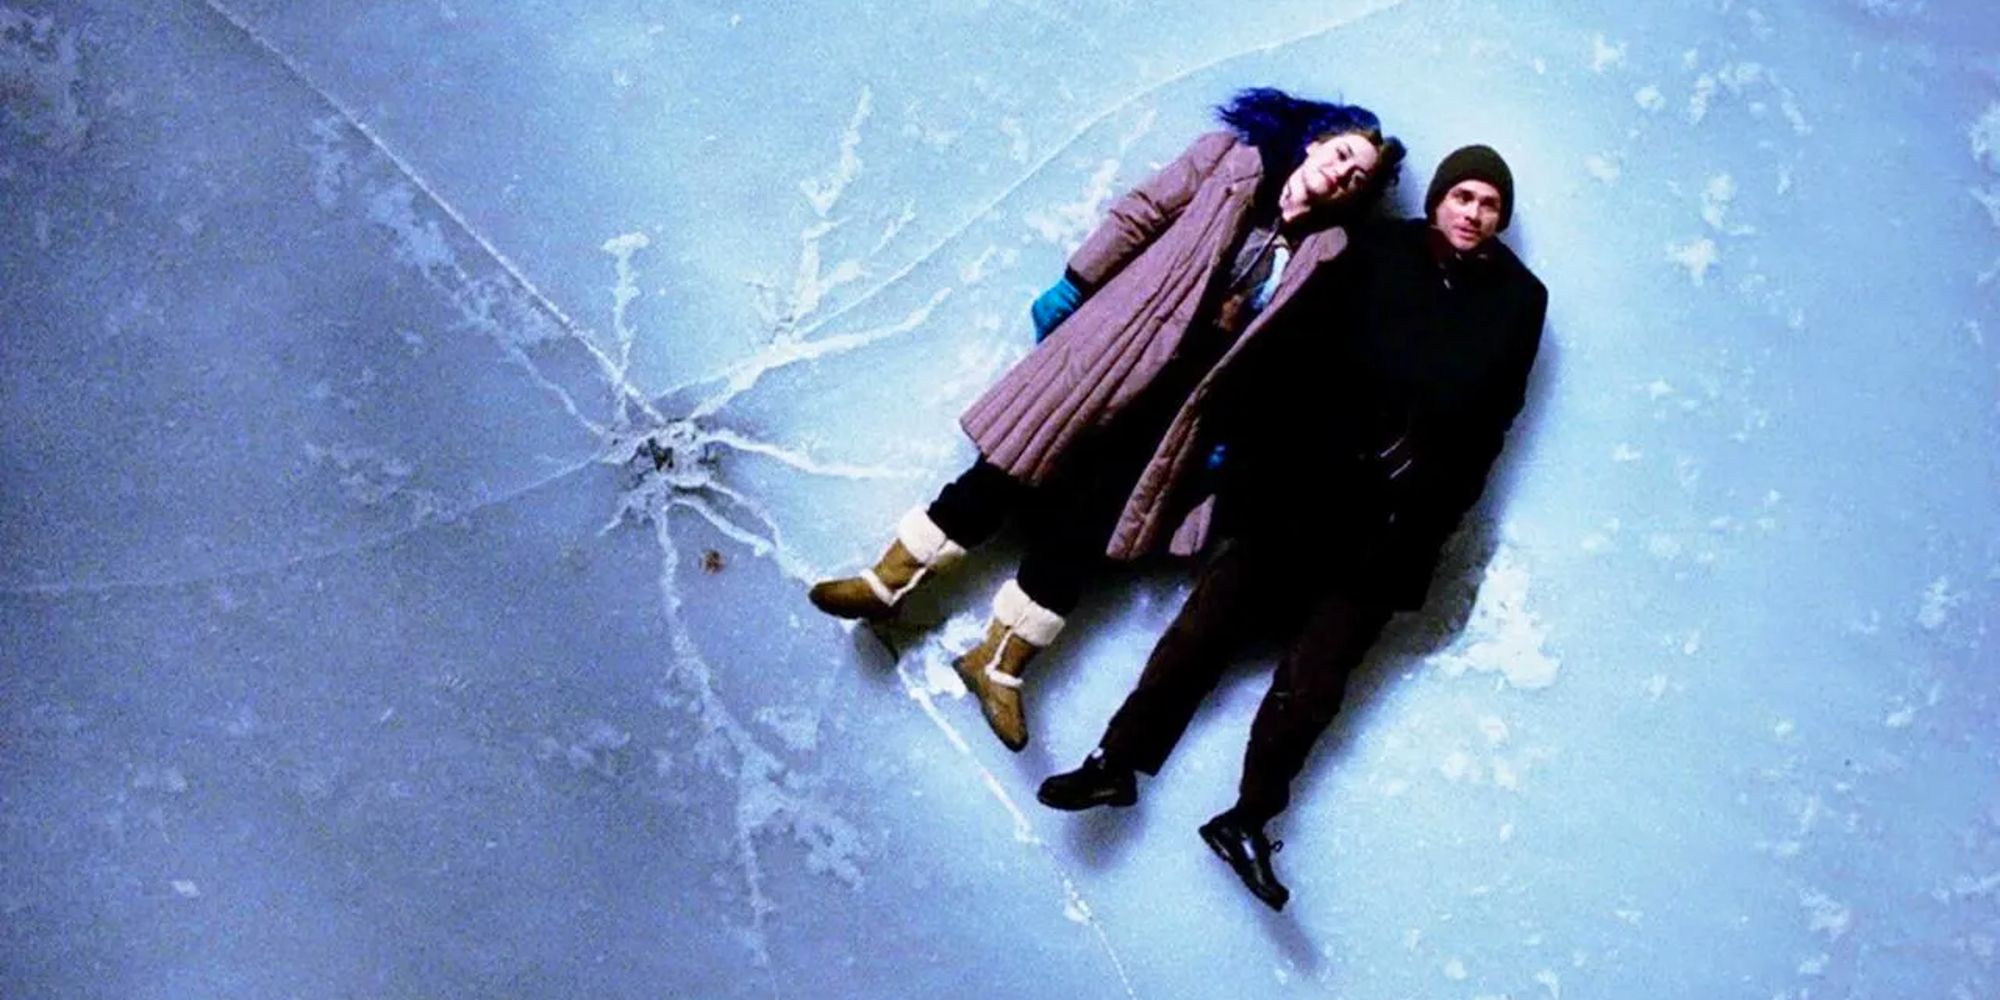 Joel and Clementine lying on the ice from Eternal Sunshine of the Spotless Mind